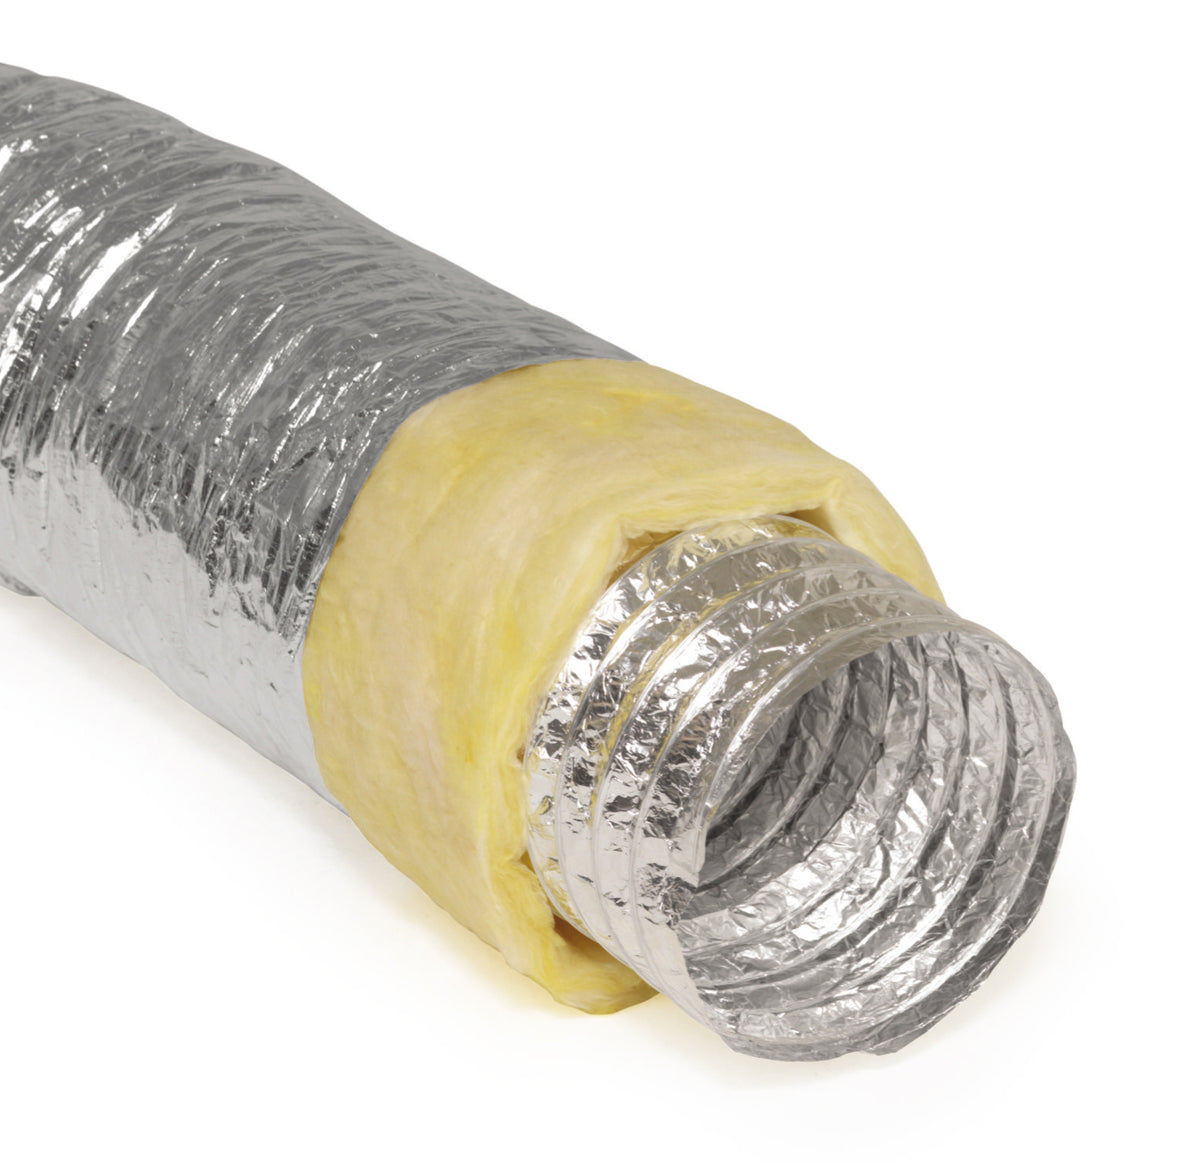 4&quot; Inch Aluminum Hose Flexible Insulated R-4.2 Air Duct Pipe for Rigid HVAC Flex Ductwork Insulation - 25&#39; Feet Long